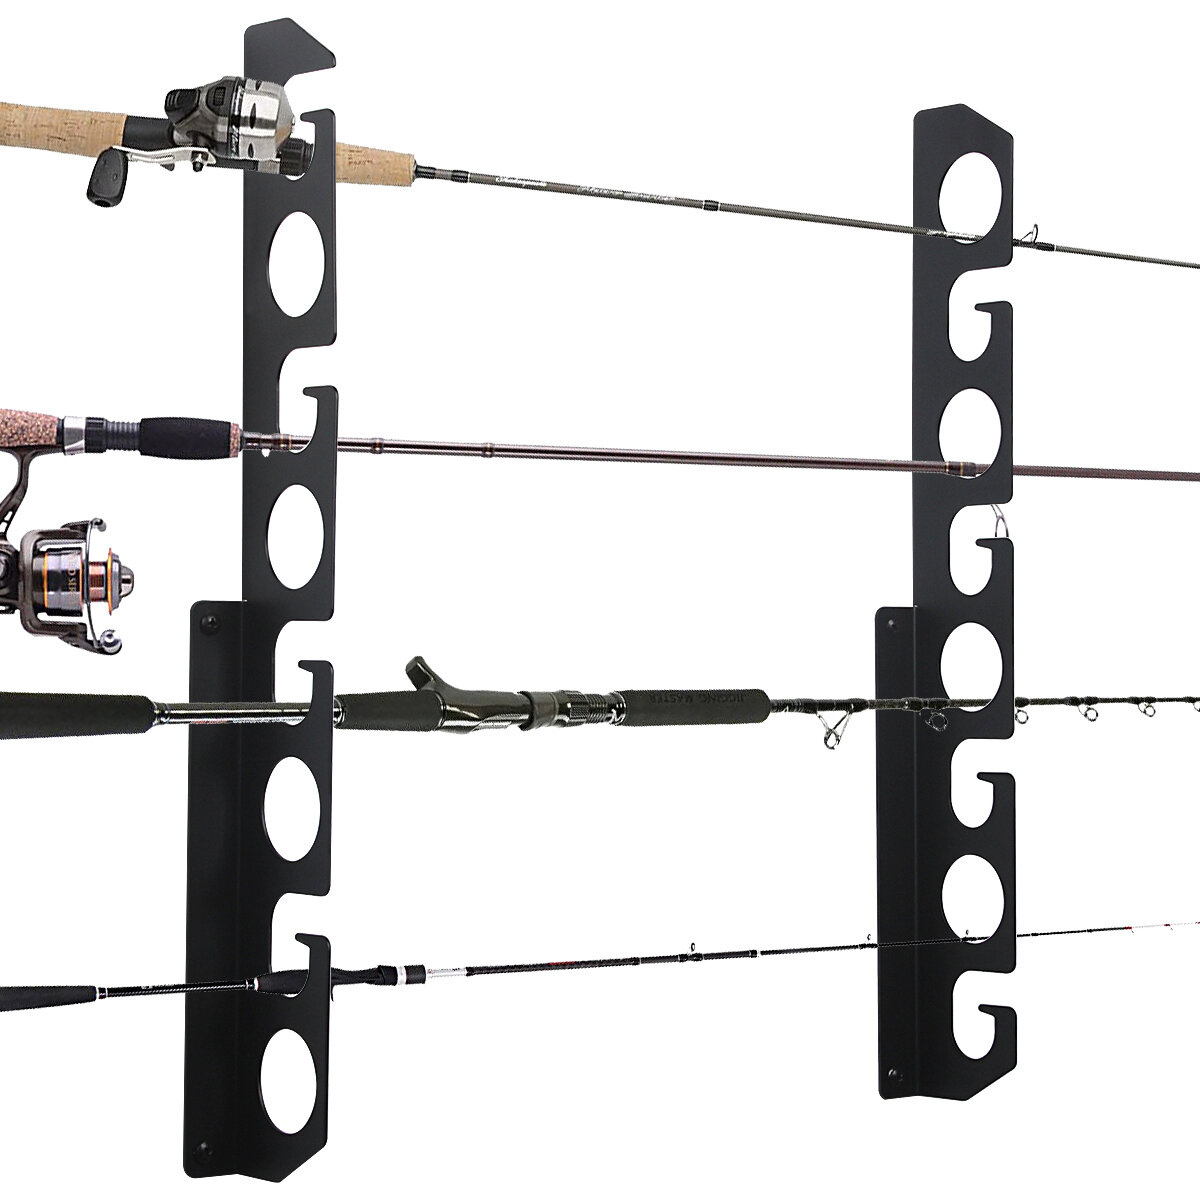 Fishing rod rack pole blue wall ceiling mounted stand storage holder FREE SHIP 